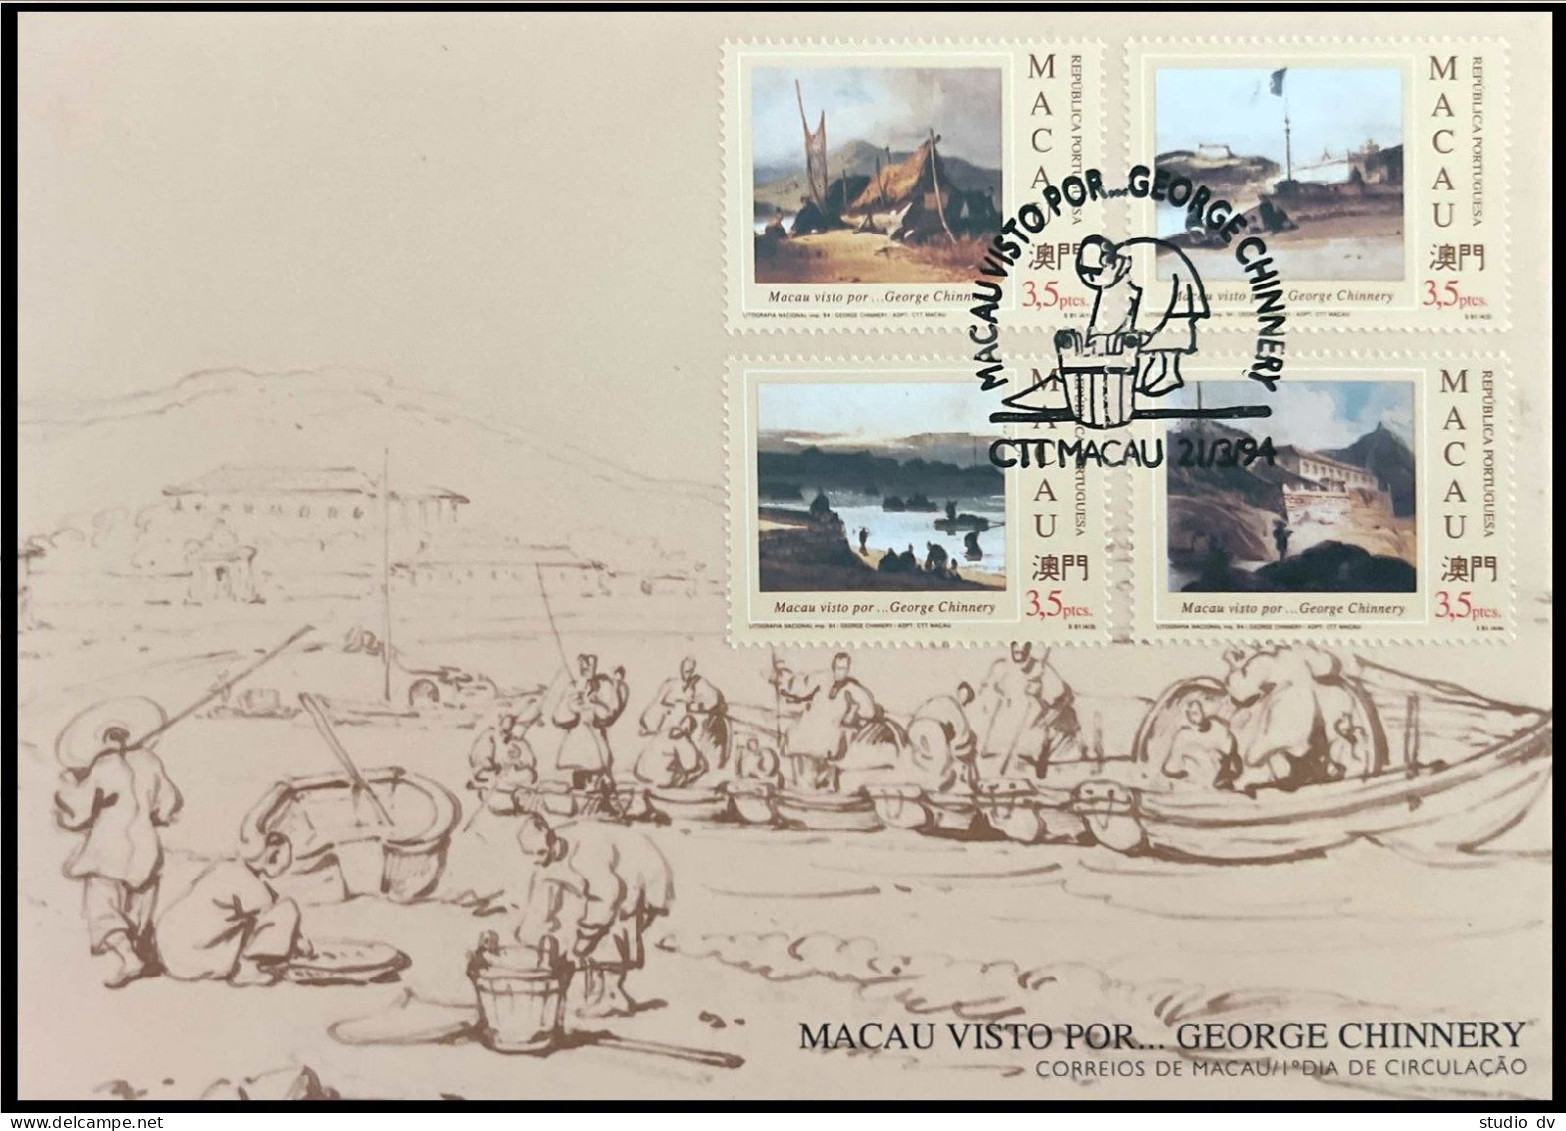 Macao 720-723, 723b, Two FDC. Scenes Of Macao, By George Chinnery, 1994. - FDC